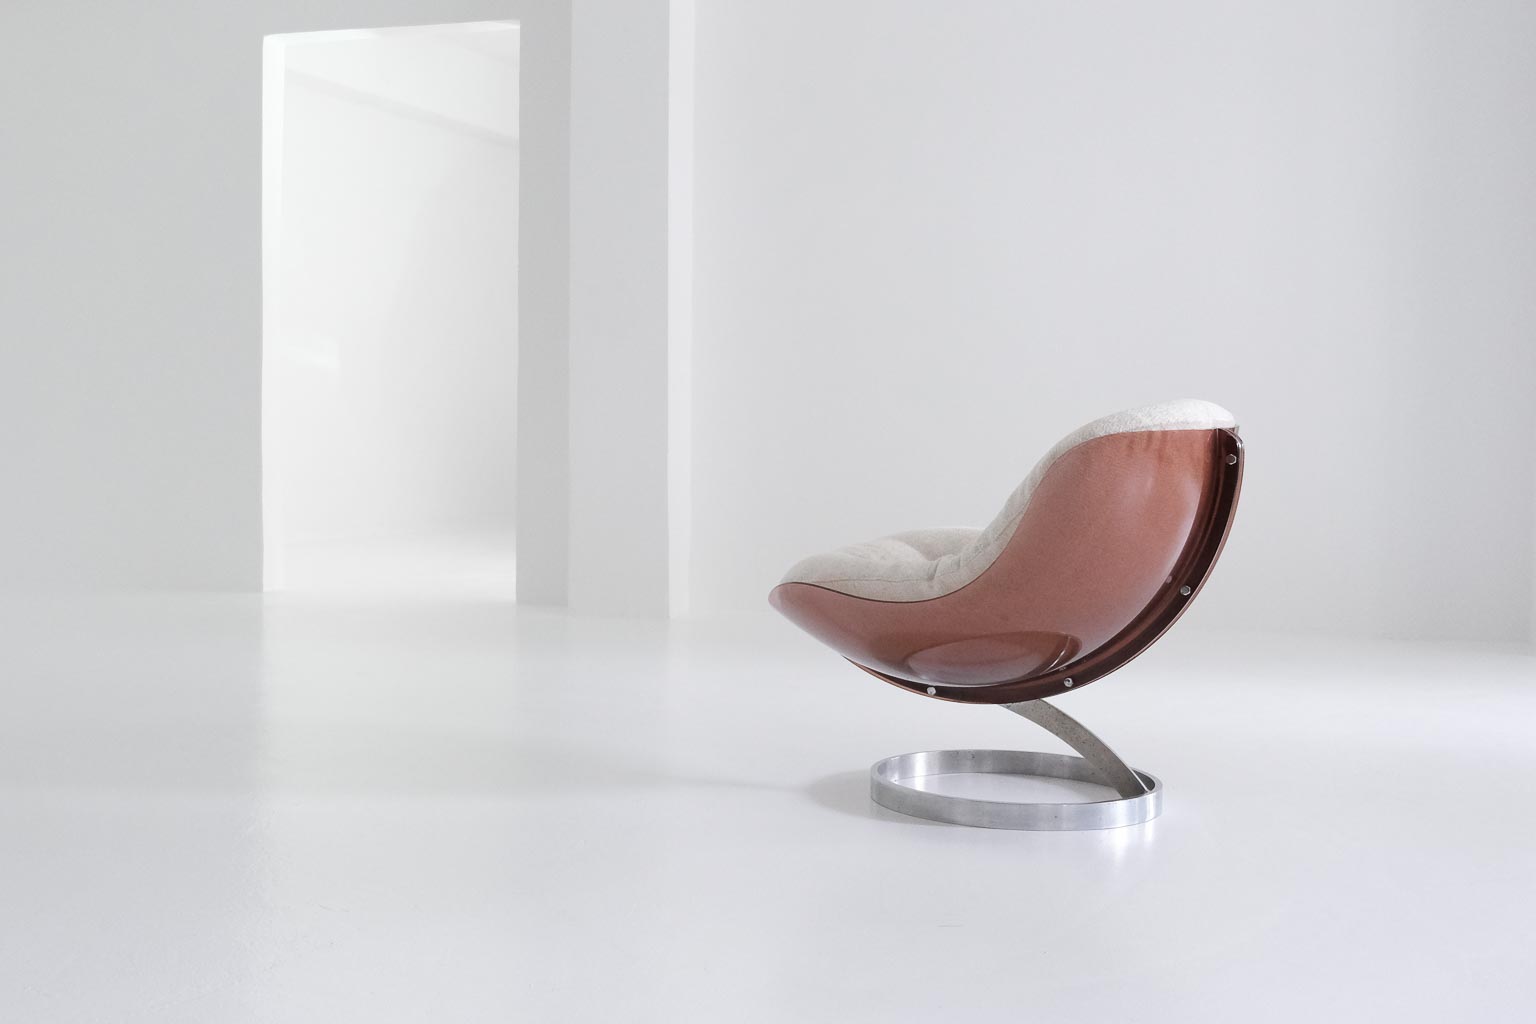 sphère lounge chair, boris tabacoff, m. m. m. mobillier modulaire modern, lounge chair, antibeige, french modernism